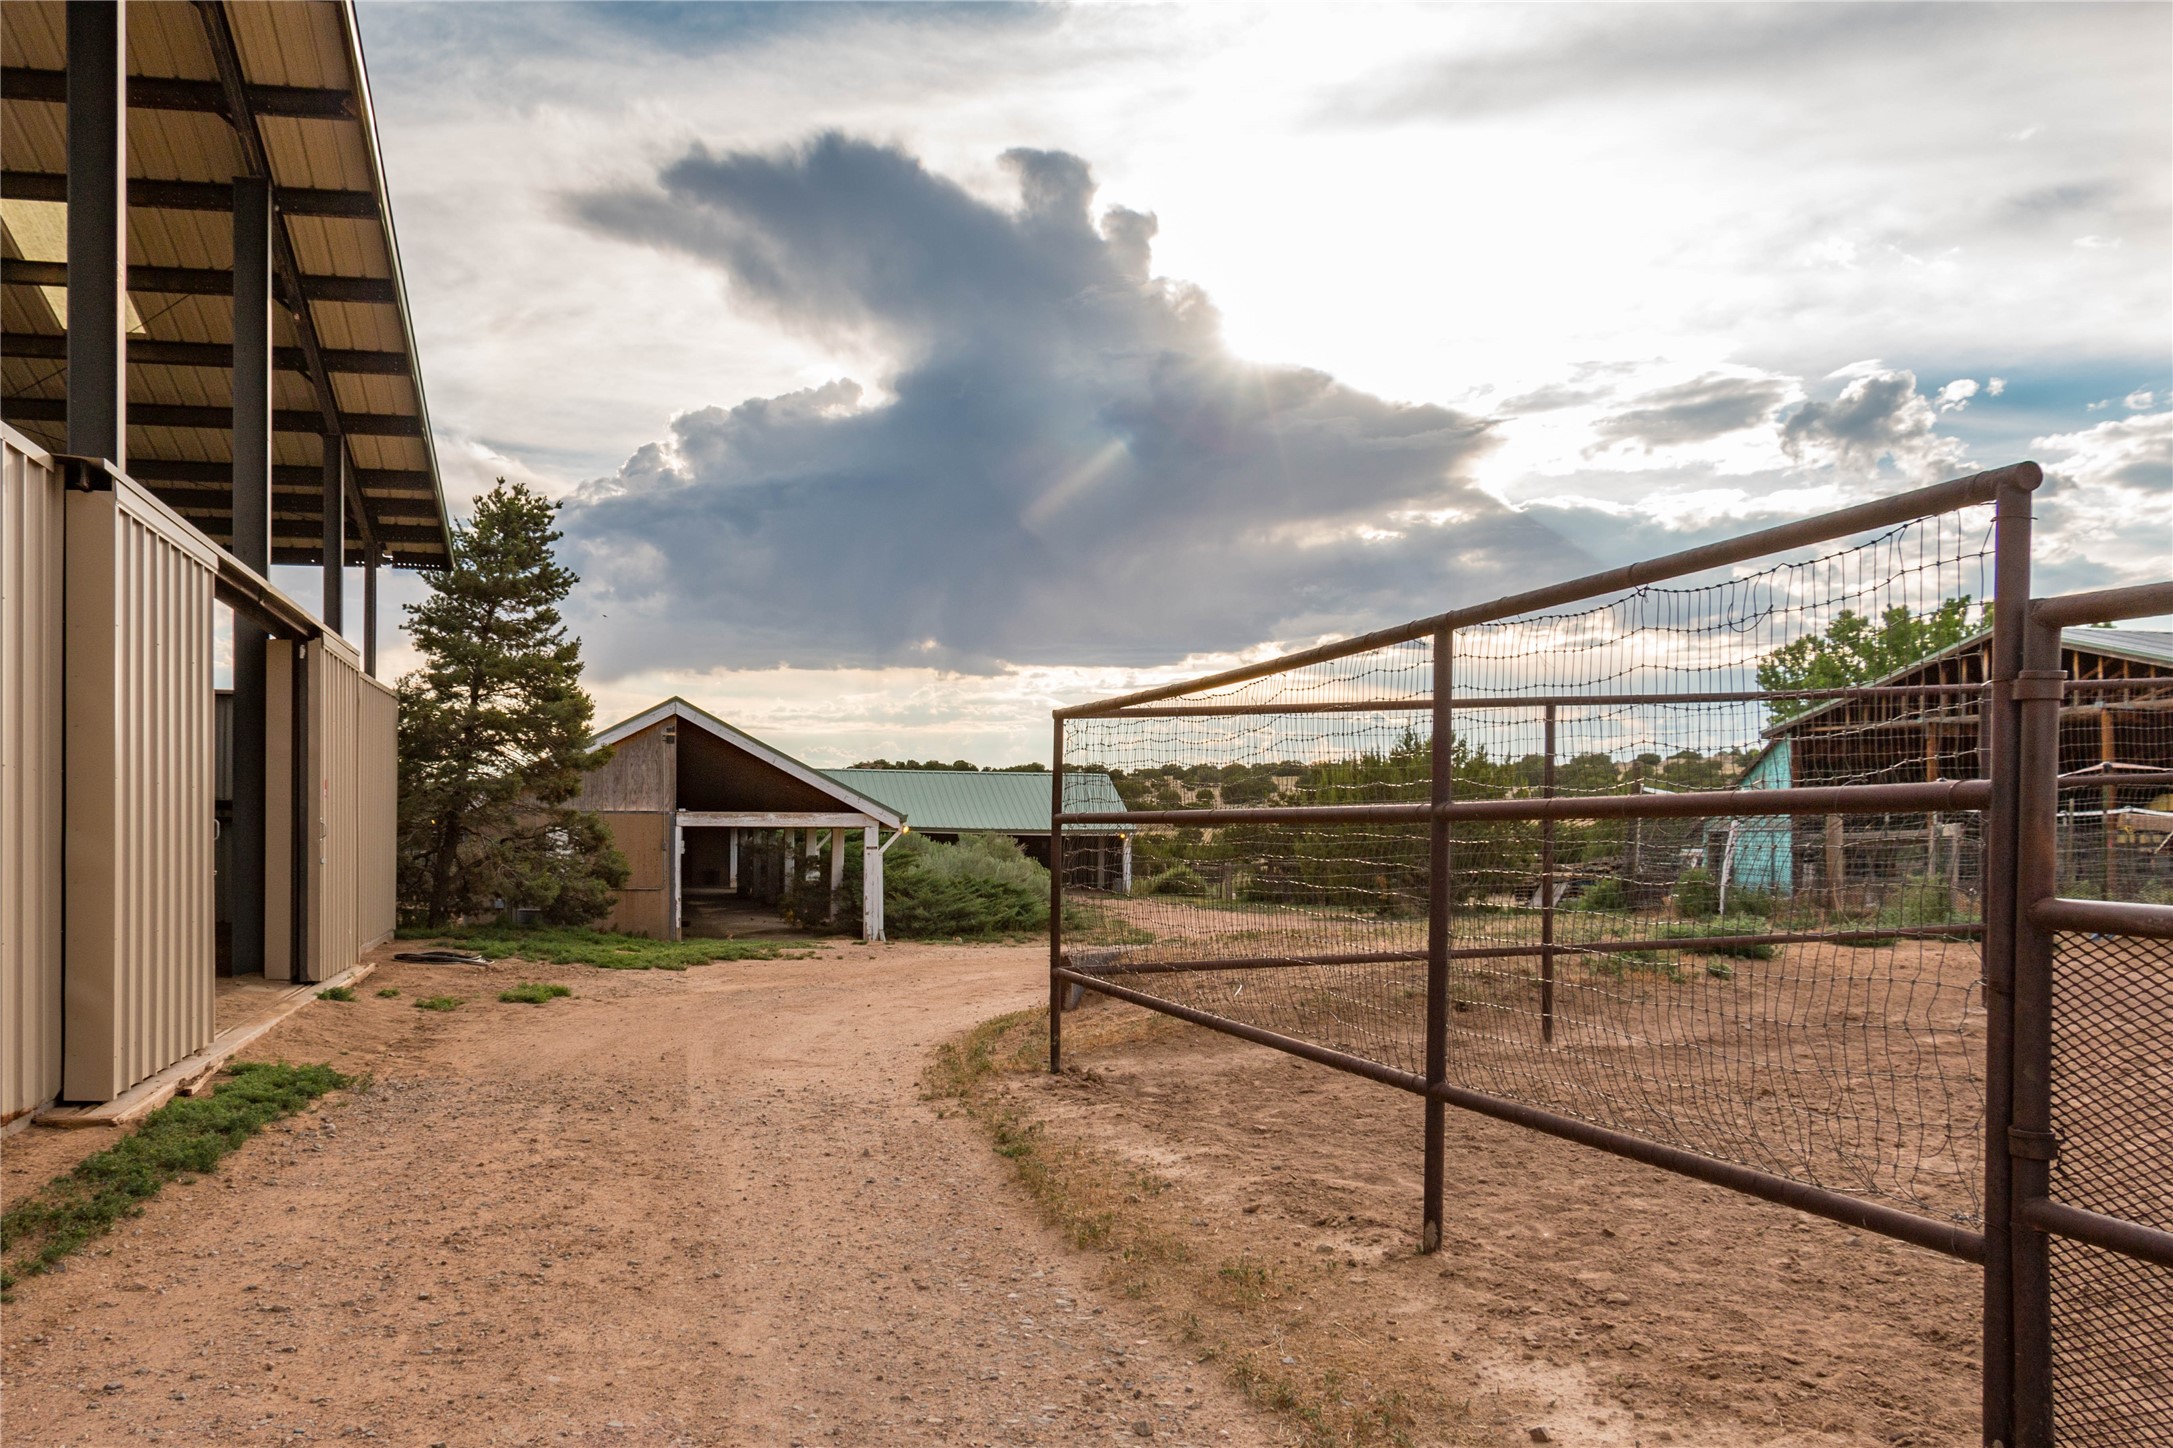 70 Goose Downs Road, Lamy, New Mexico 87540, 7 Bedrooms Bedrooms, ,8 BathroomsBathrooms,Residential,For Sale,70 Goose Downs Road,202231629